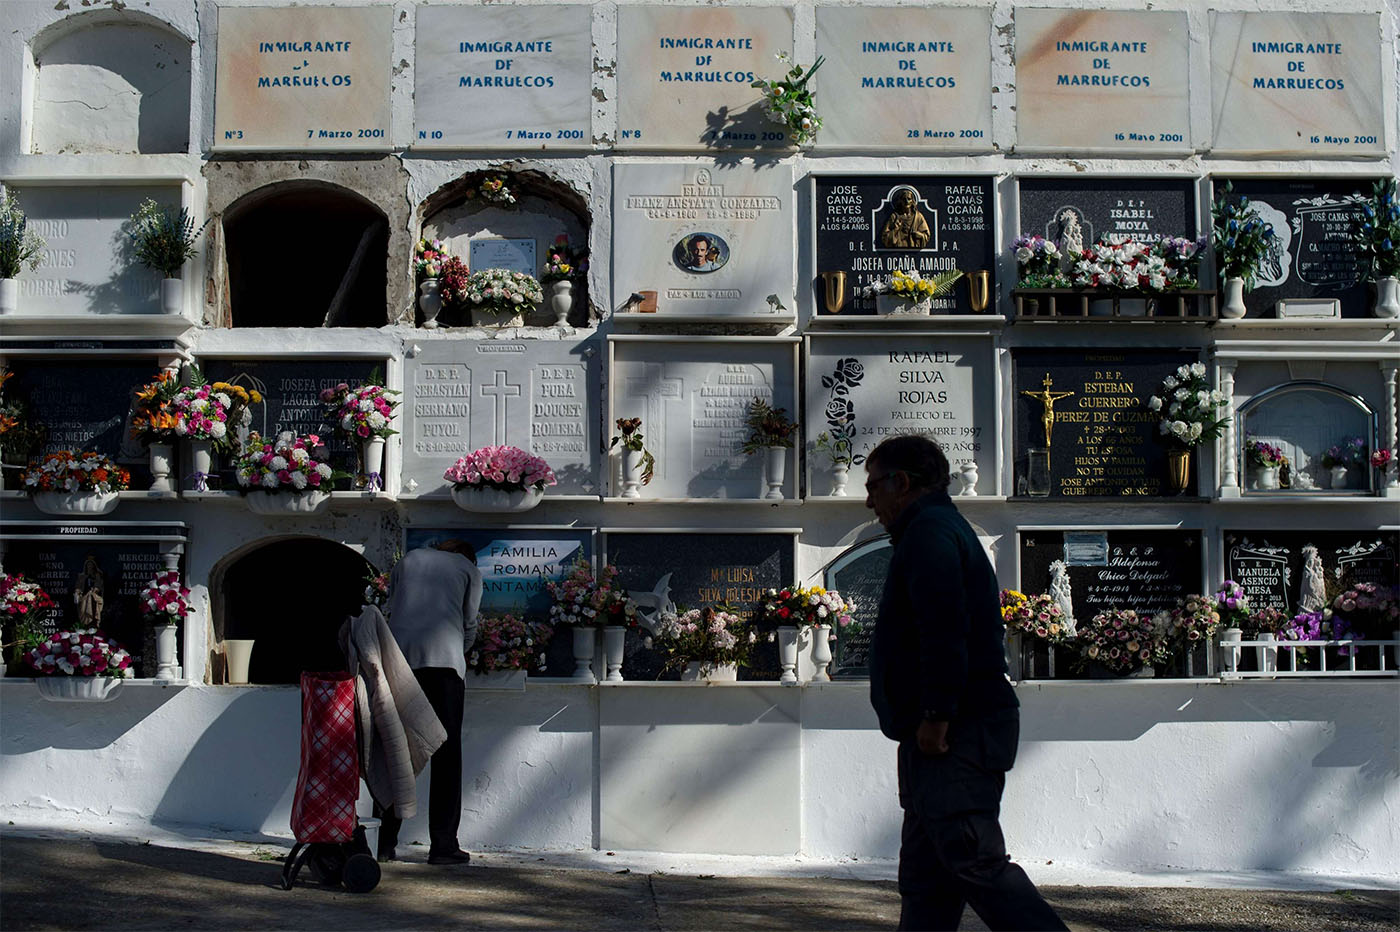 Rows of tombstones at Tarifa's cemetery mark where unnamed migrants are buried